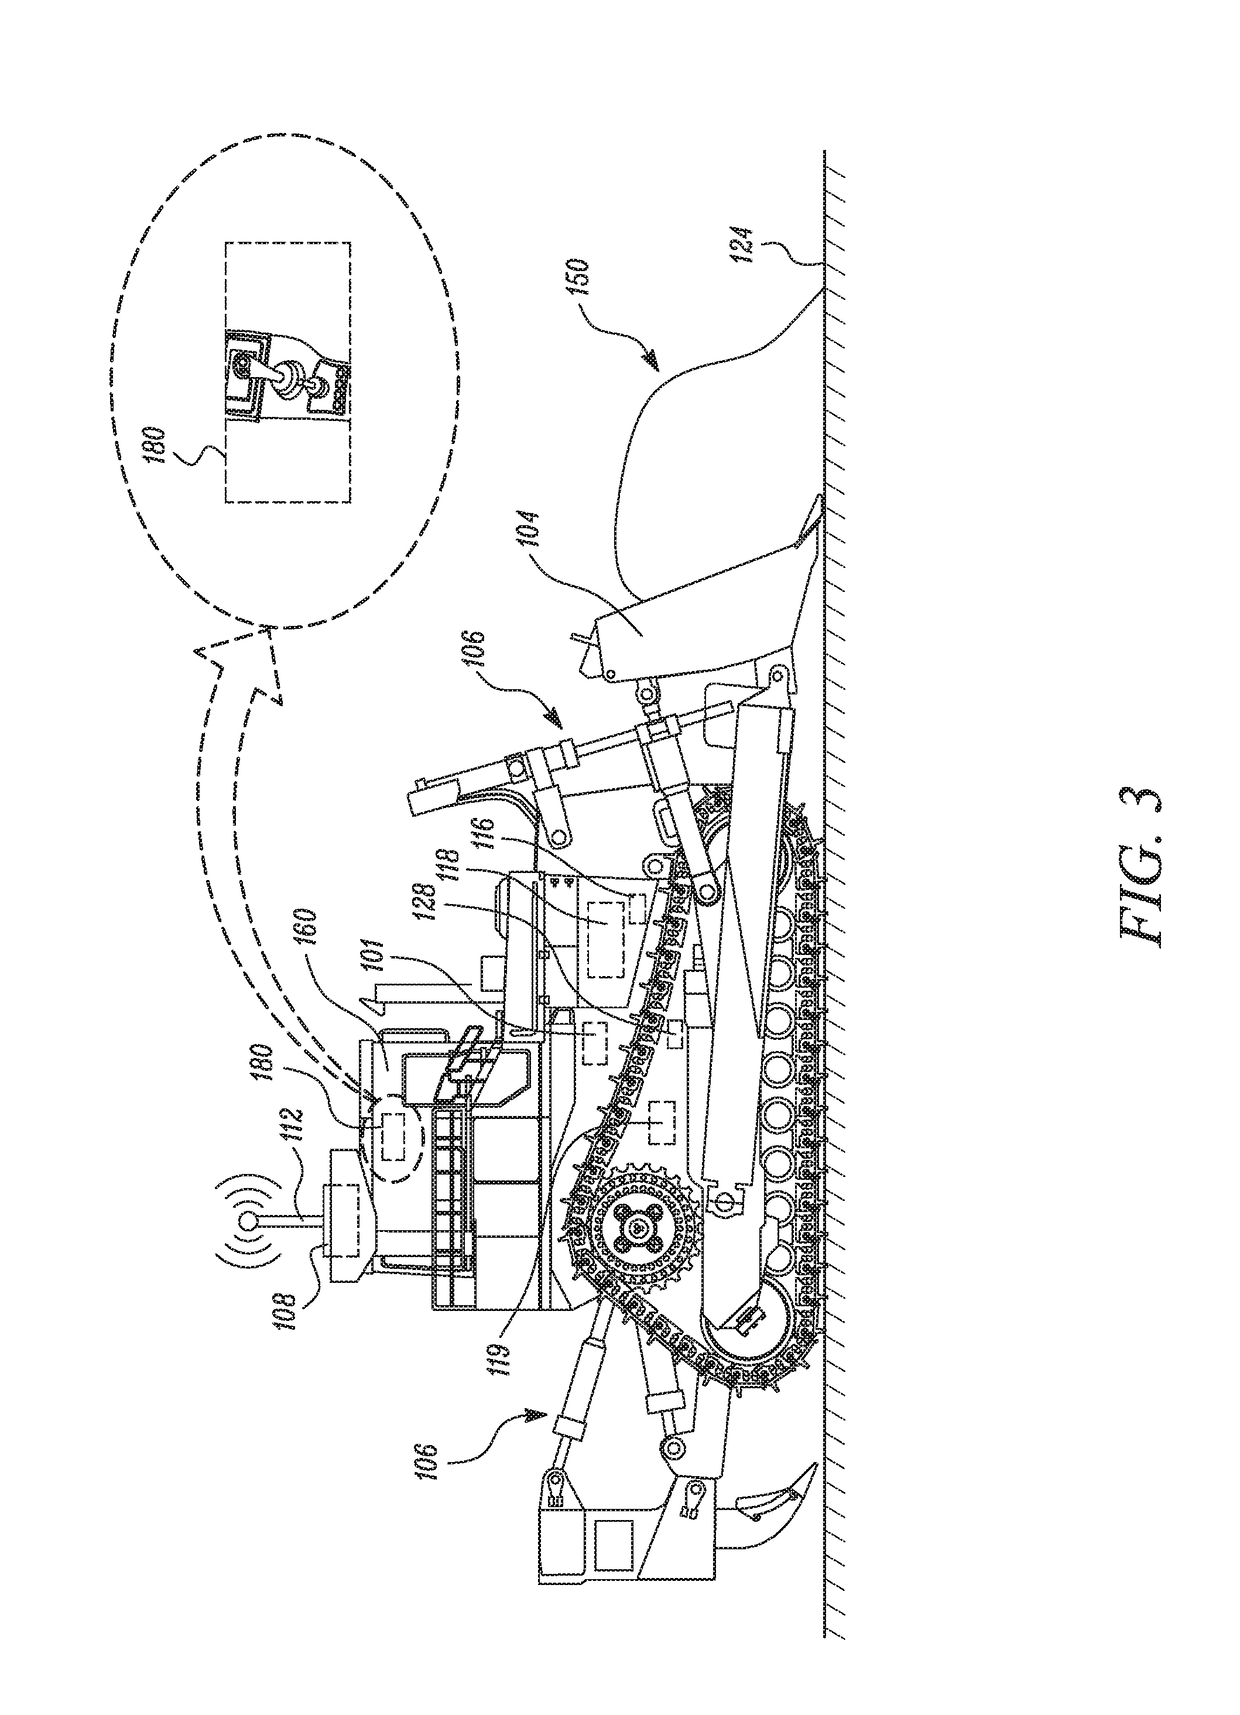 Systems and methods for pile spacing